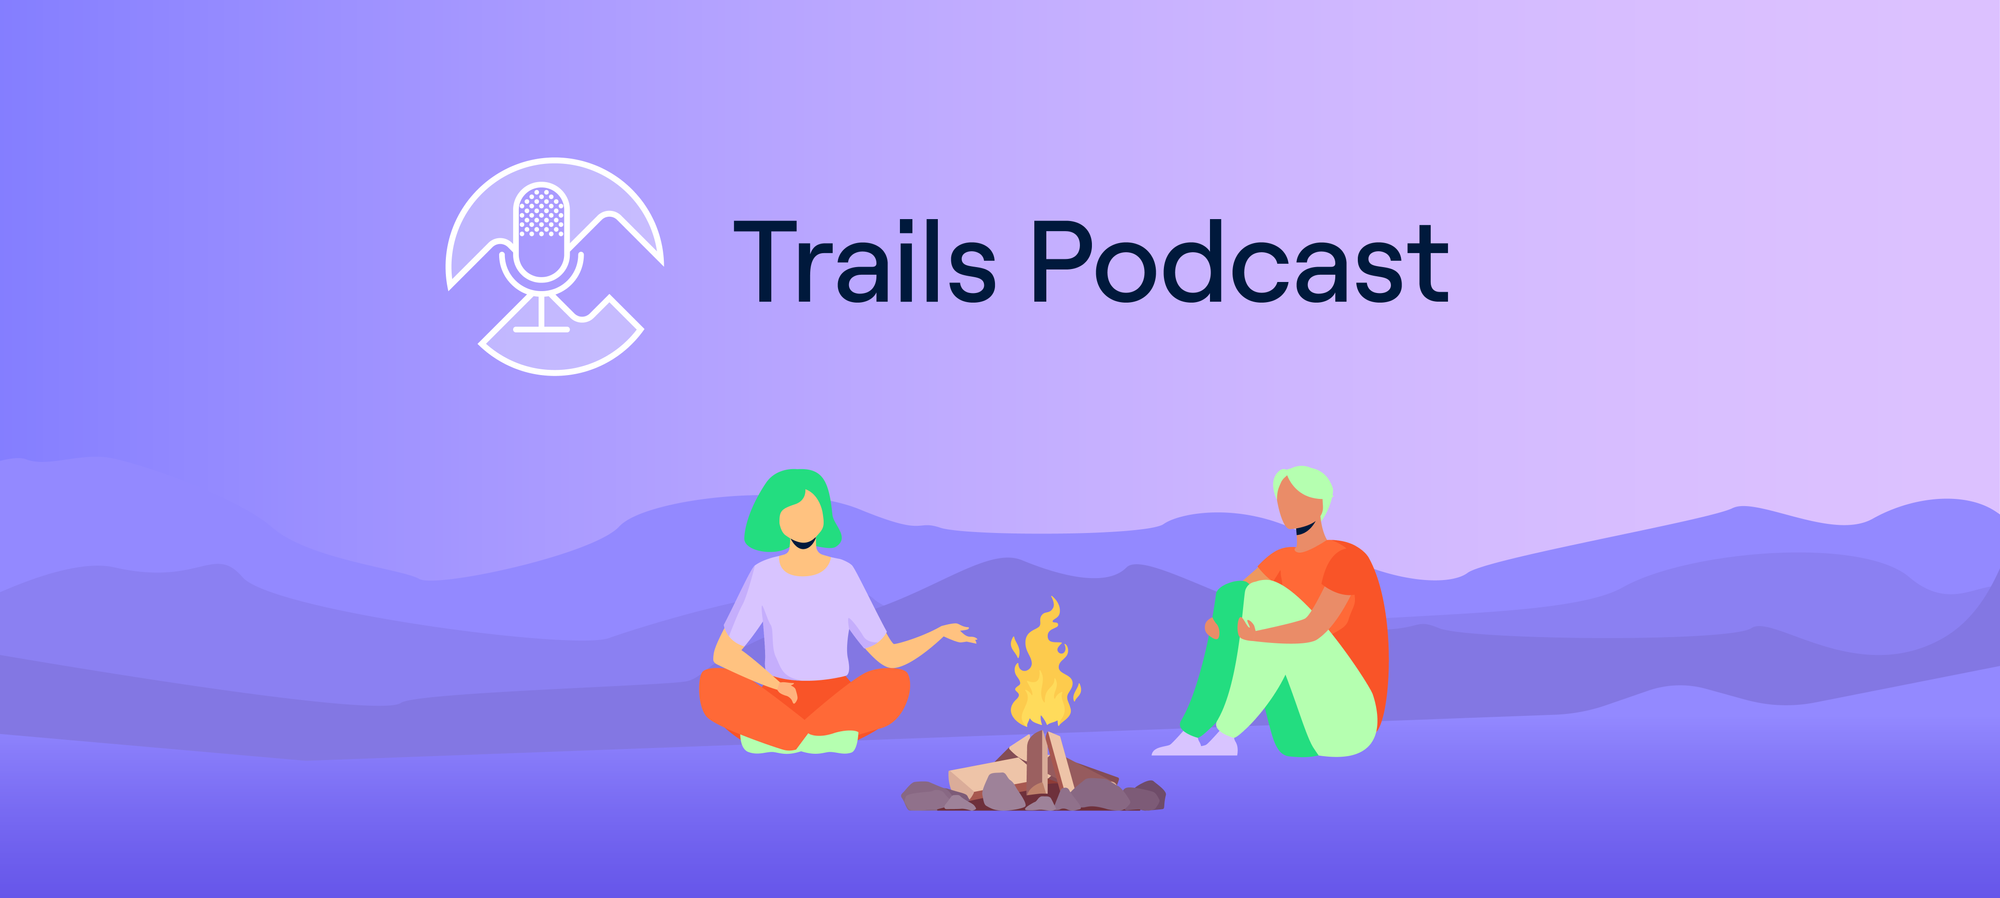 Welcome to Trails Podcast